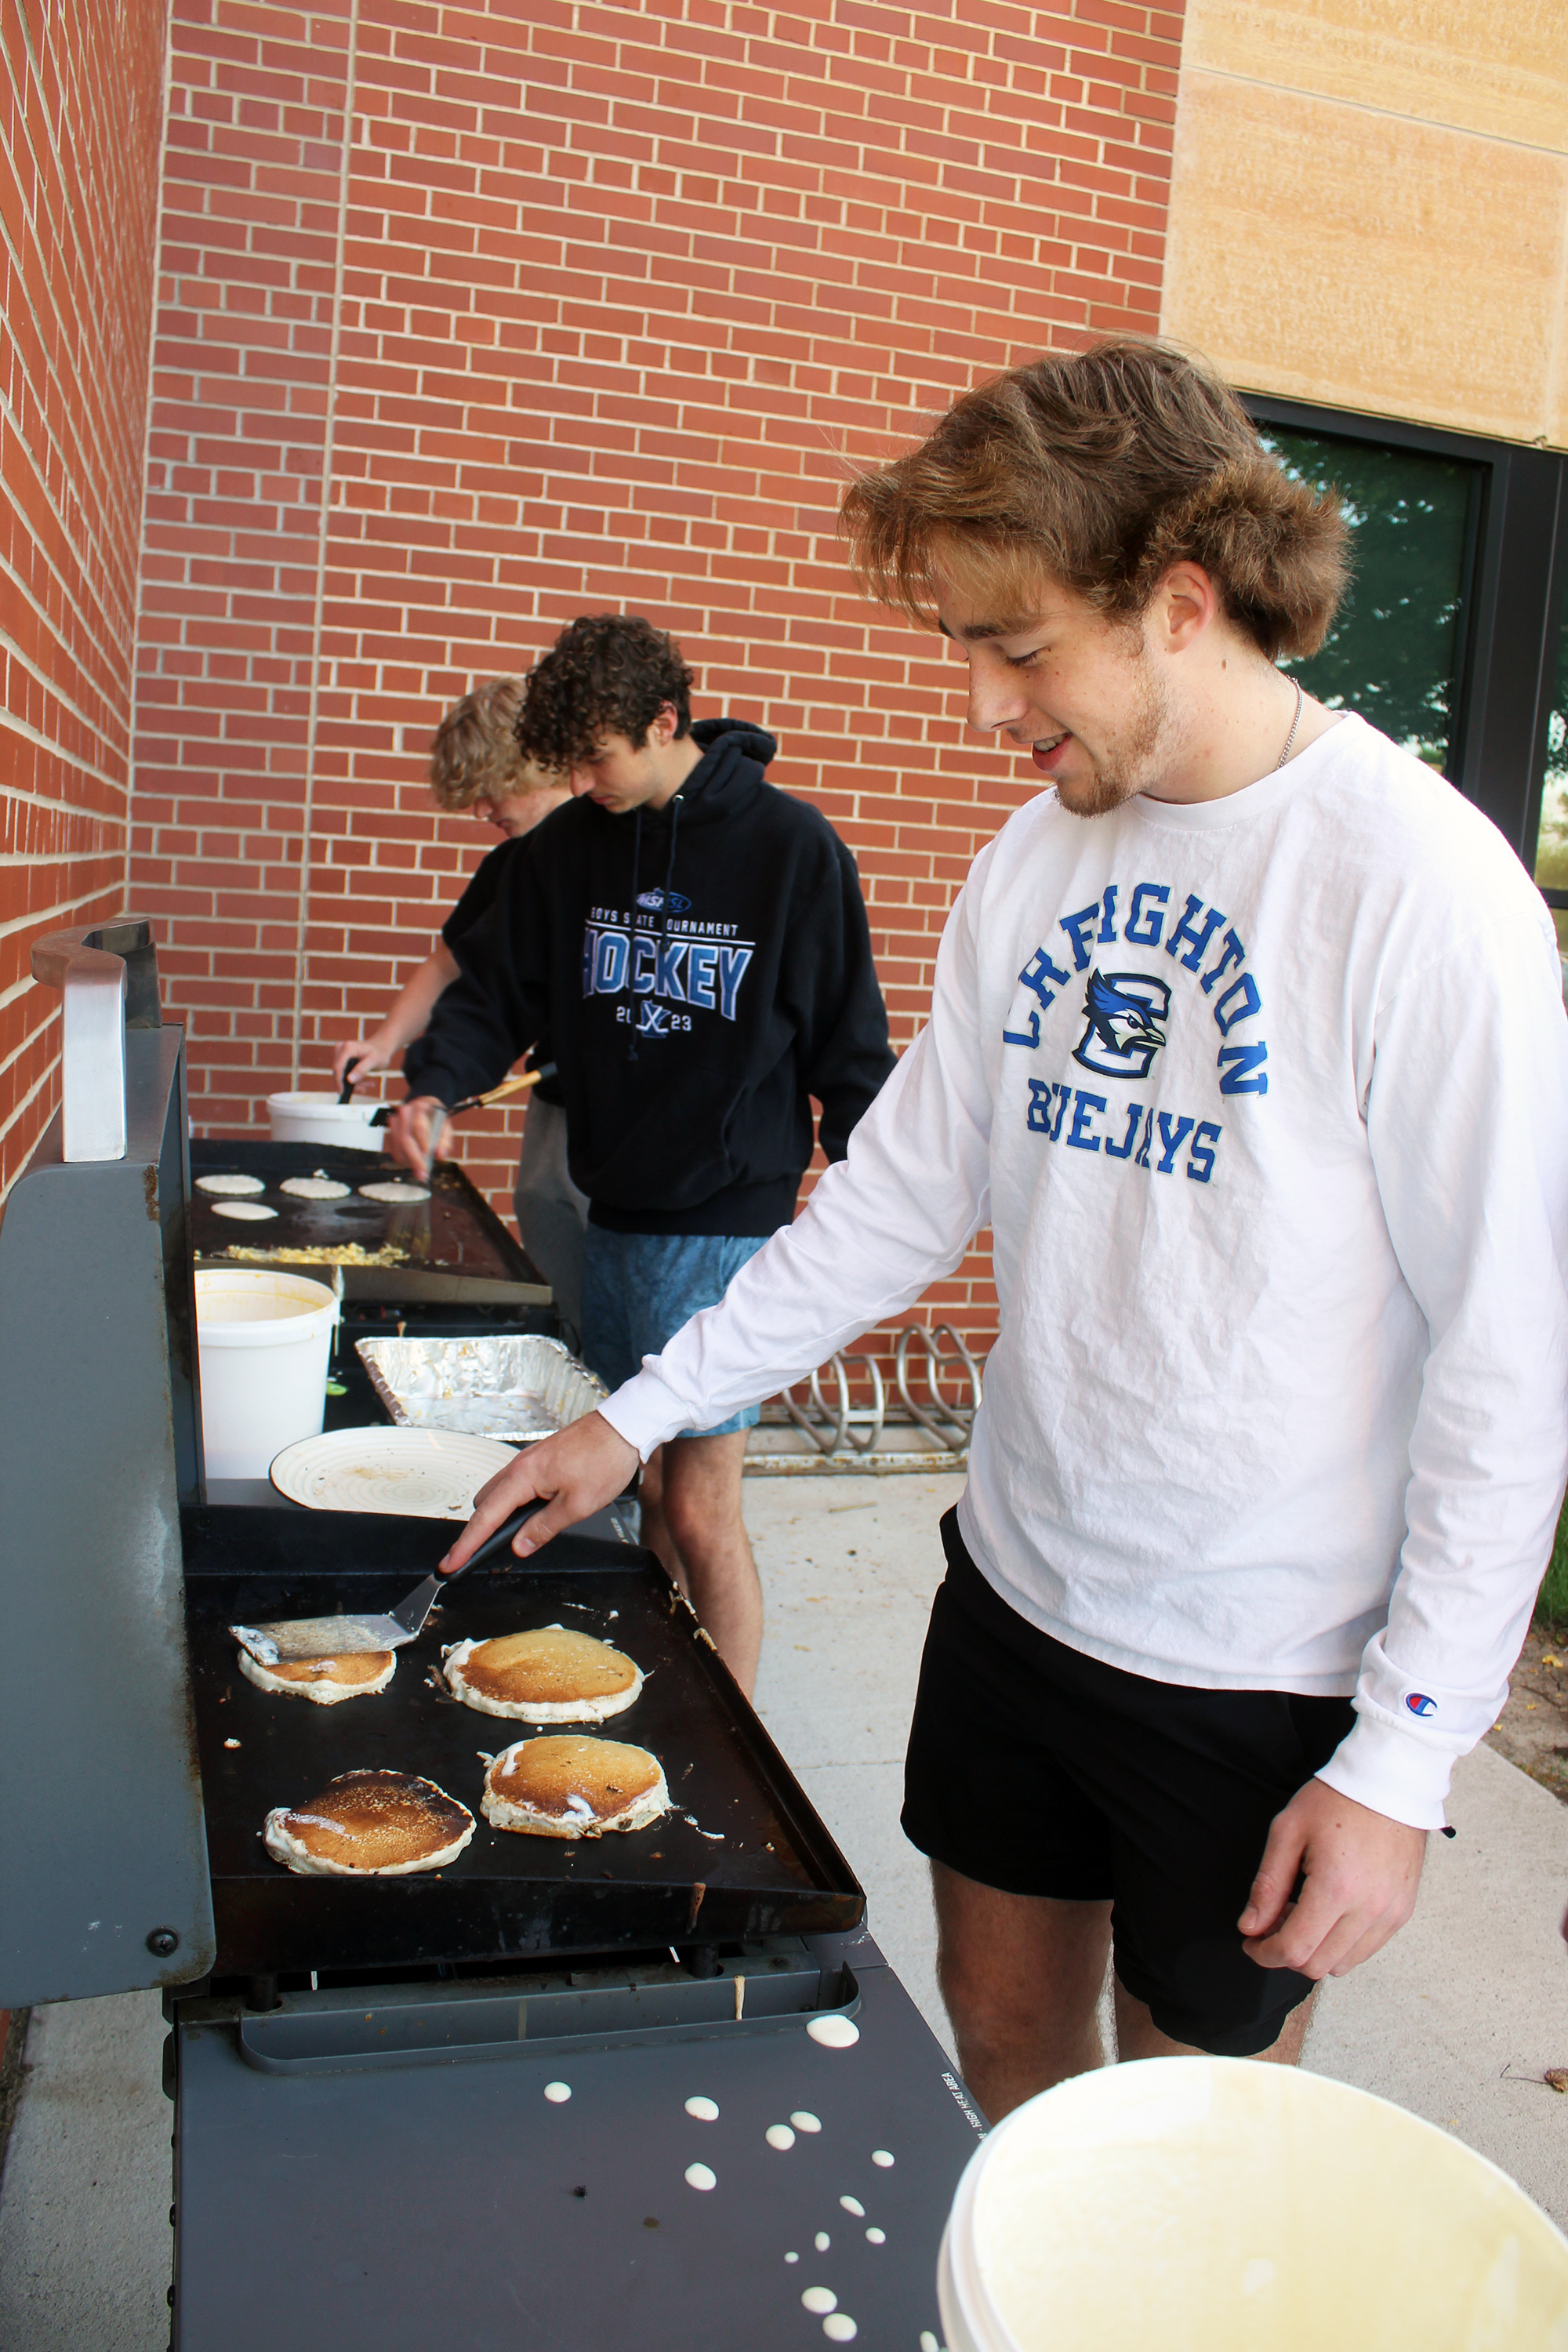 Luverne High School student council president Patrick Kroski grills pancakes with fellow seniors Tyler Arends (center) preparing scrambled eggs and Elliot Domagala also grilling pancakes. Mavis Fodness/Rock County Star Herald Photo